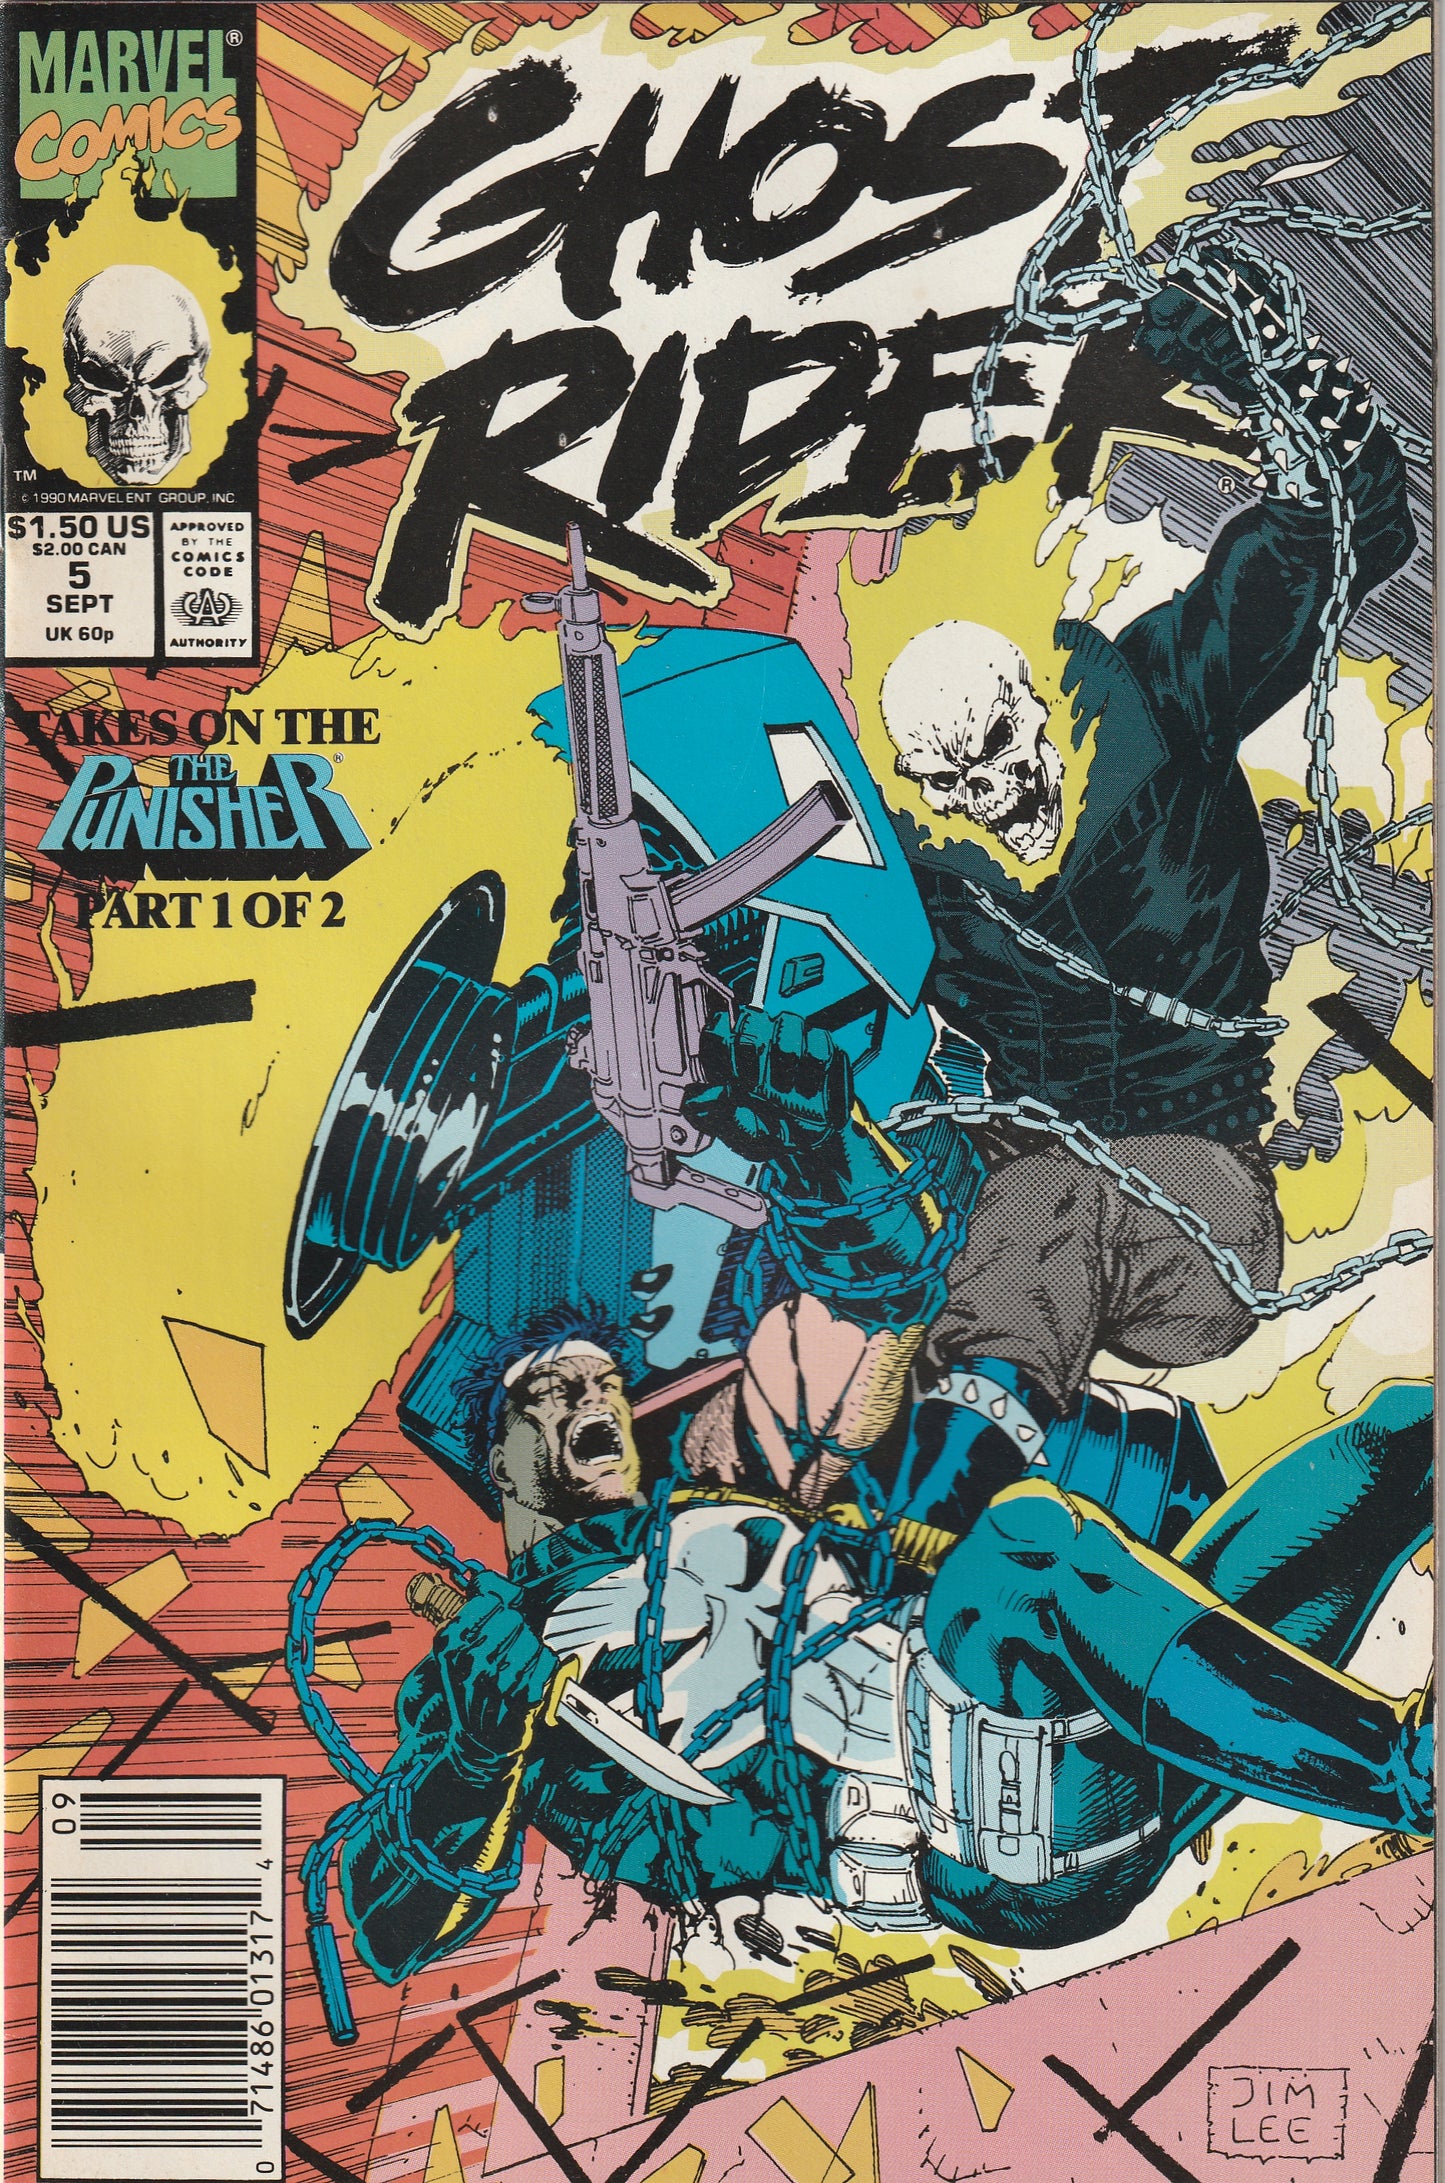 Ghost Rider #5 (1990) - 1st Appearance of Linda Wei